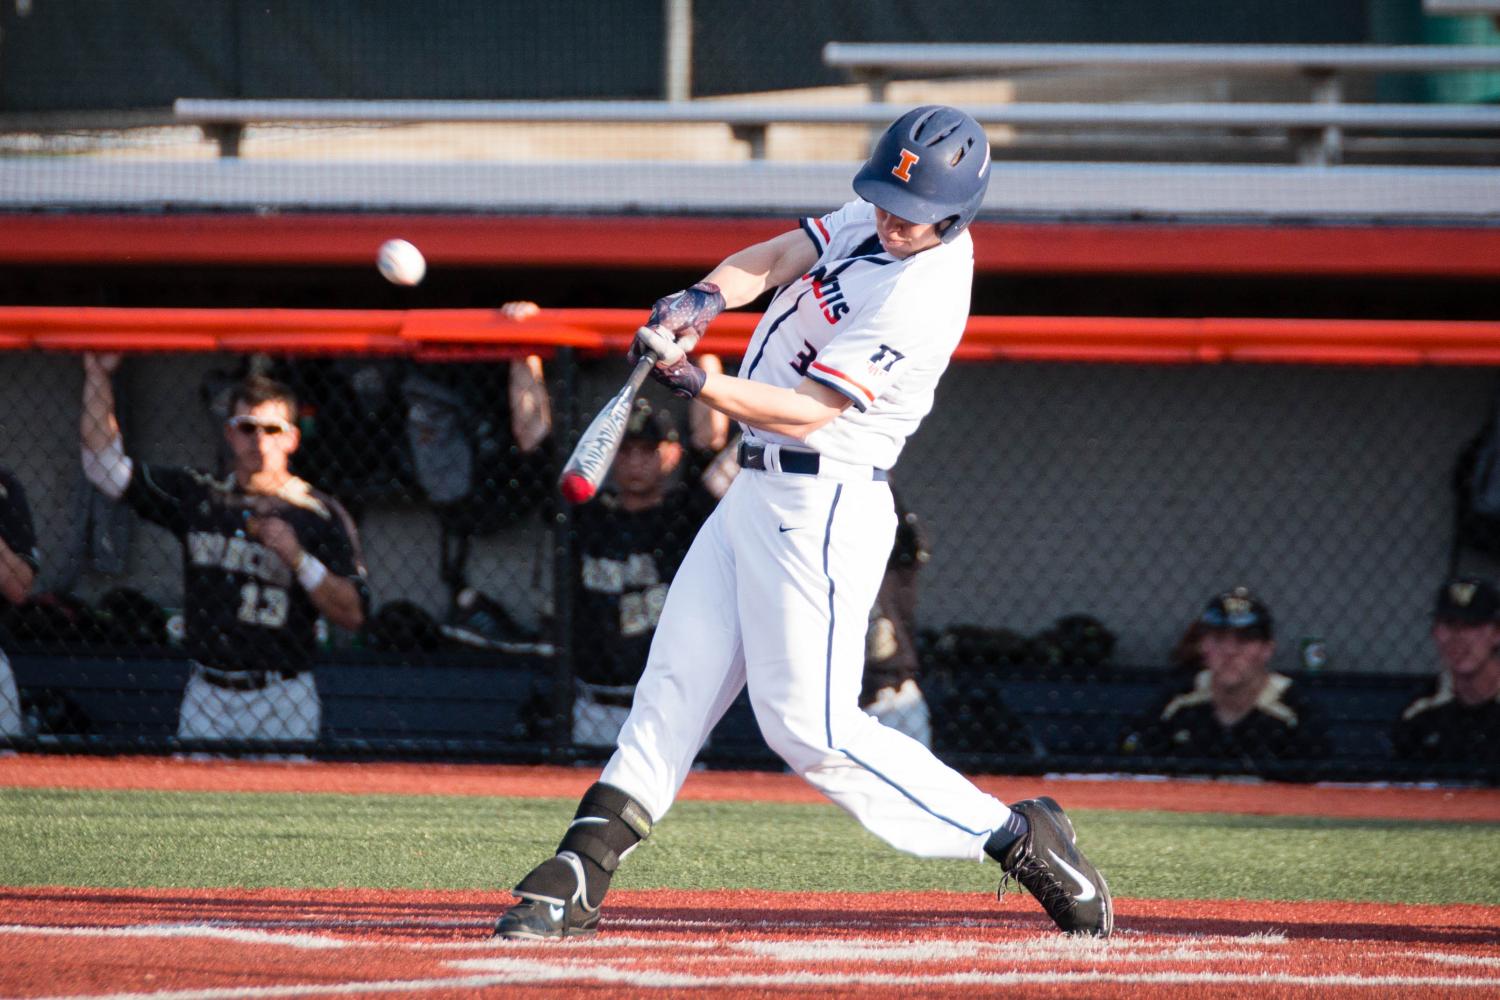 Illinois%E2%80%99+Jack+Yalowitz+hits+a+single+against+Western+Michigan+at+Illinois+Field+on+April+18.+The+Illini+swept+a+double-header+in+their+series+win+against+Minnesota.+